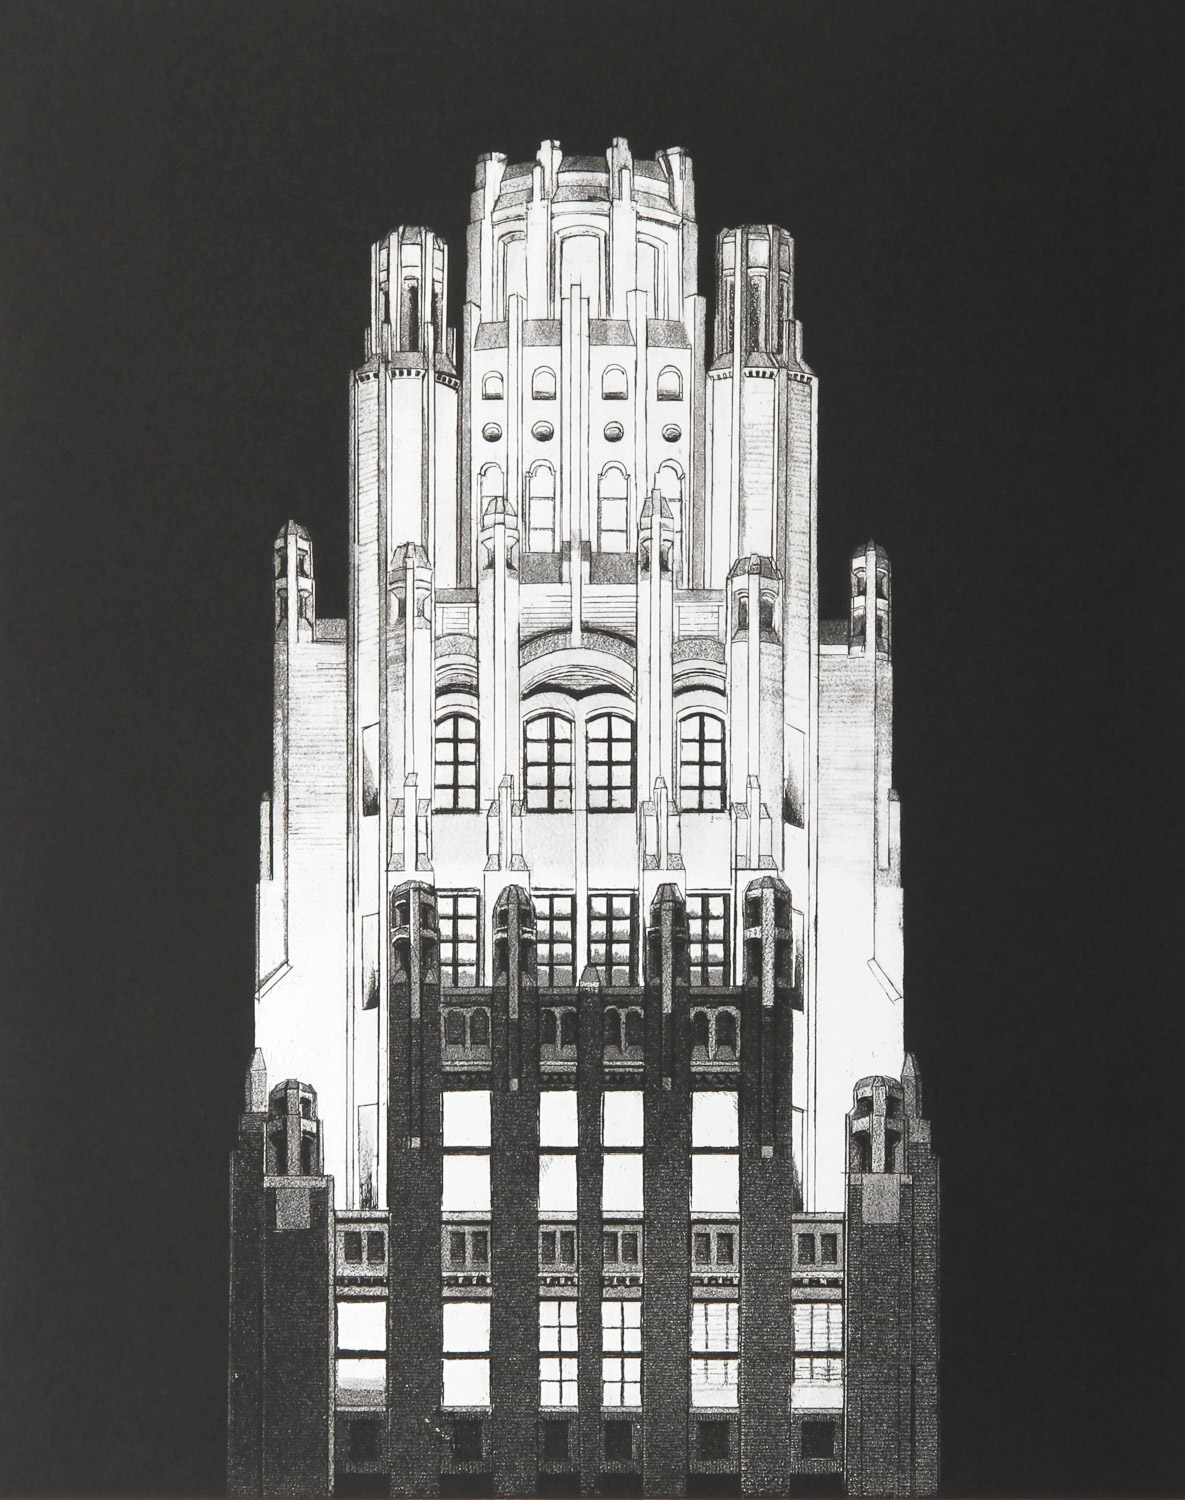 A print depicting the uppermost section of the American Radiator Building at night. It is created in strong black and white tones. The background is solid black. The building is grey in the lower portion, with light seemingly streaming from the windows. The upper portion seems infused with bright white light.